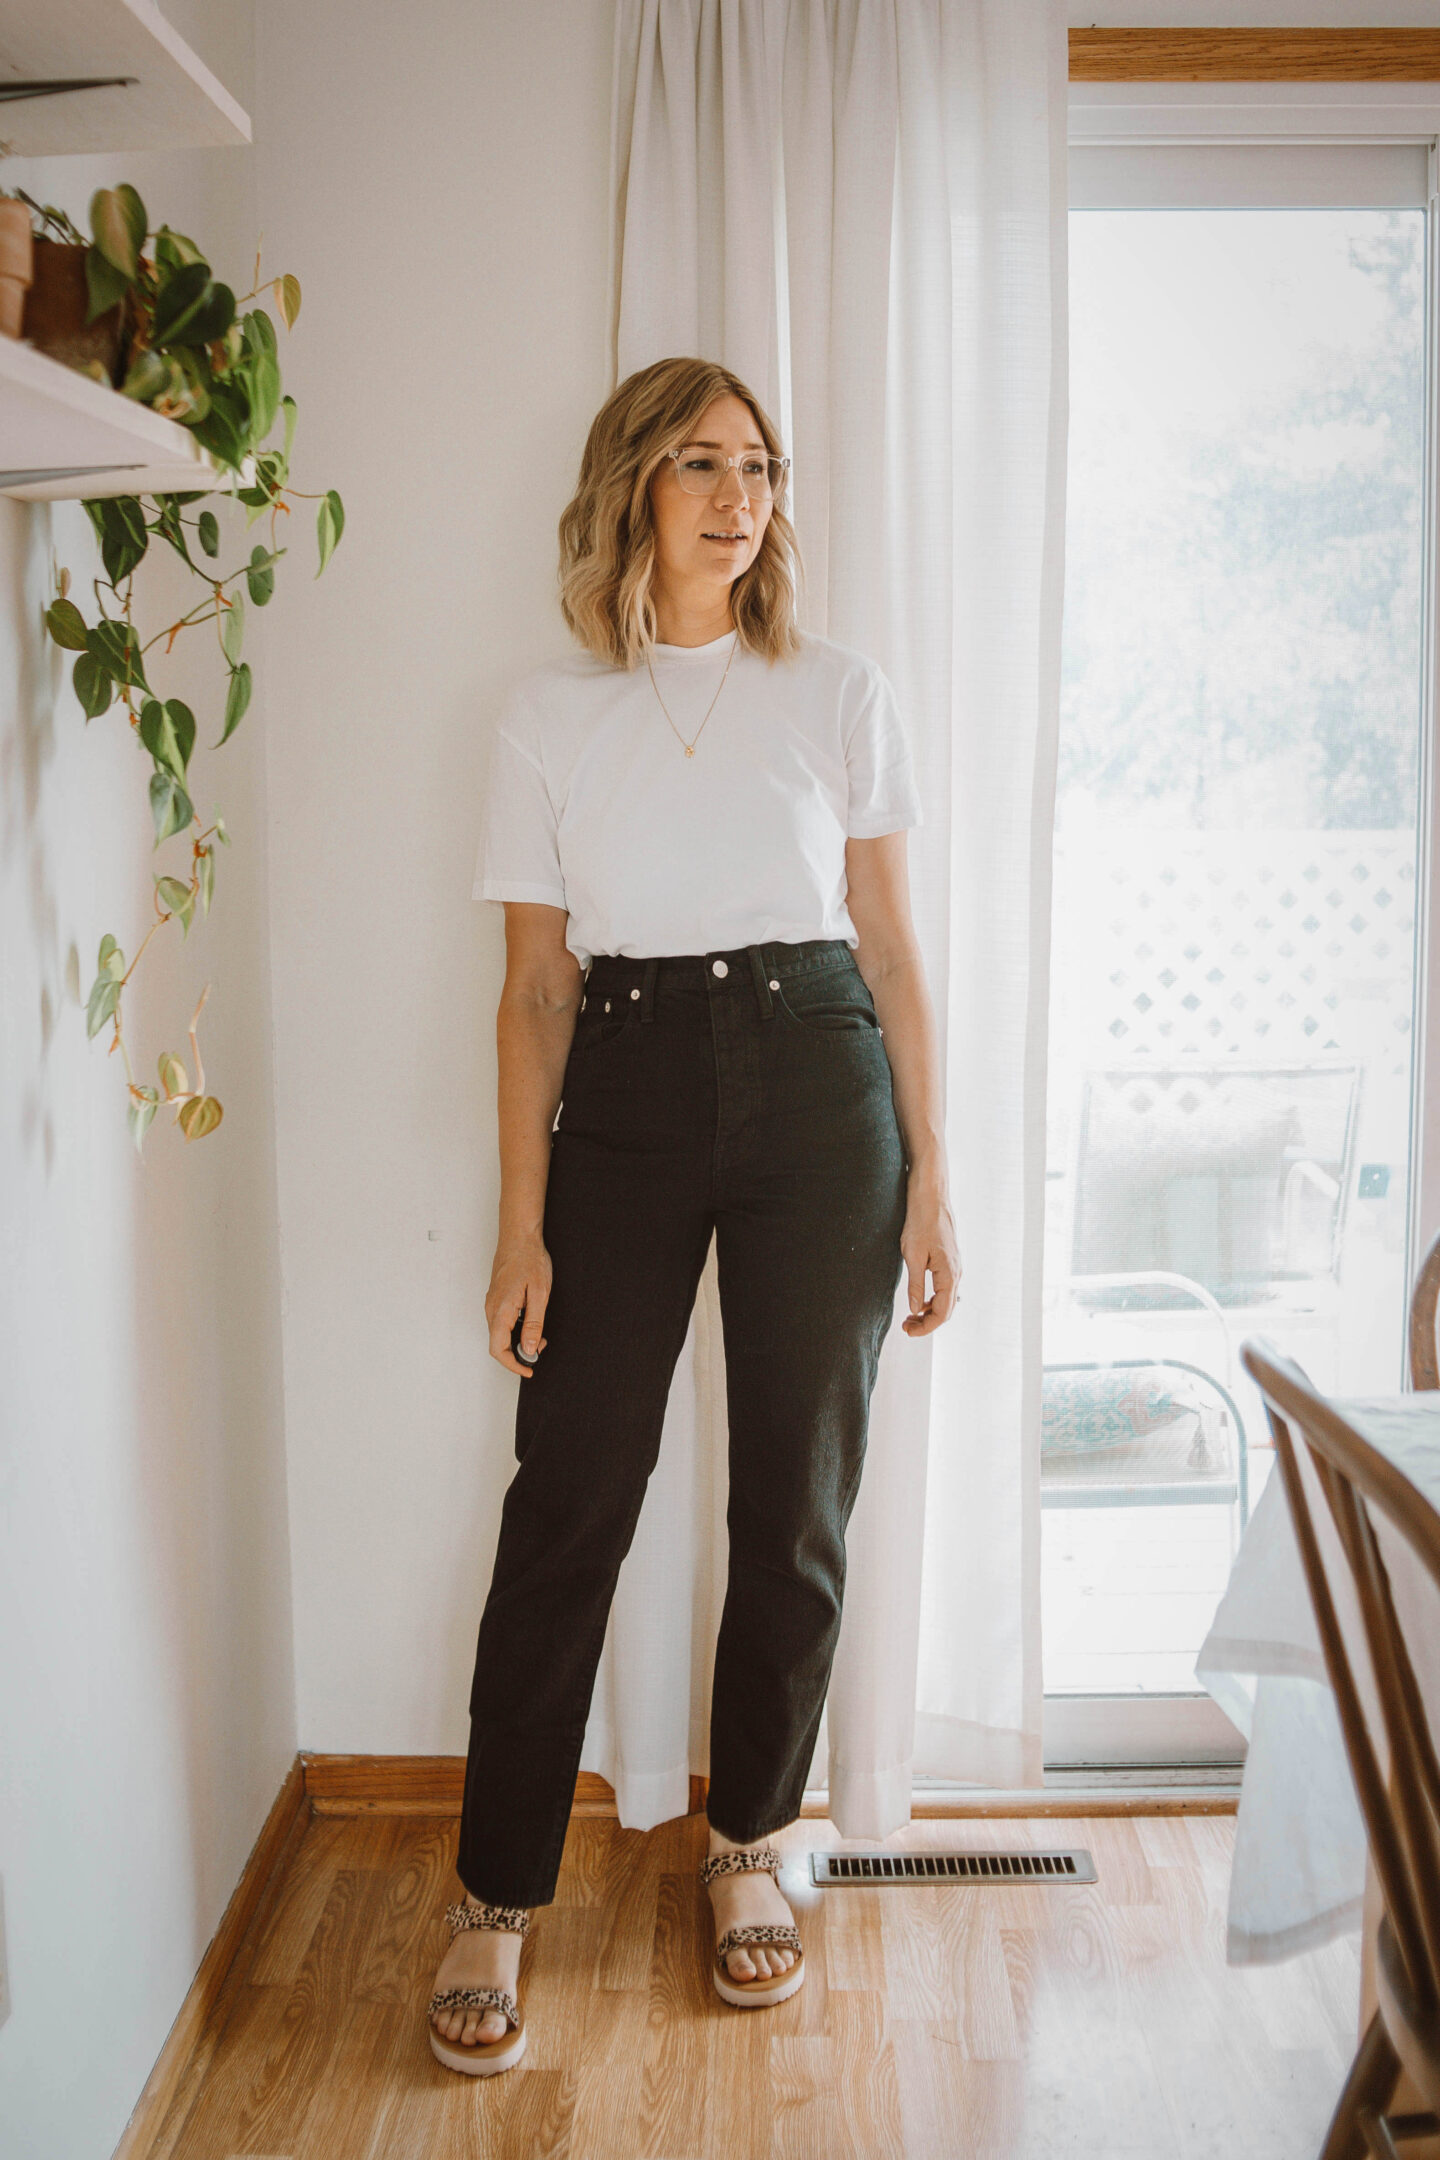 Madewell Denim Guide: The Dad Jean Review